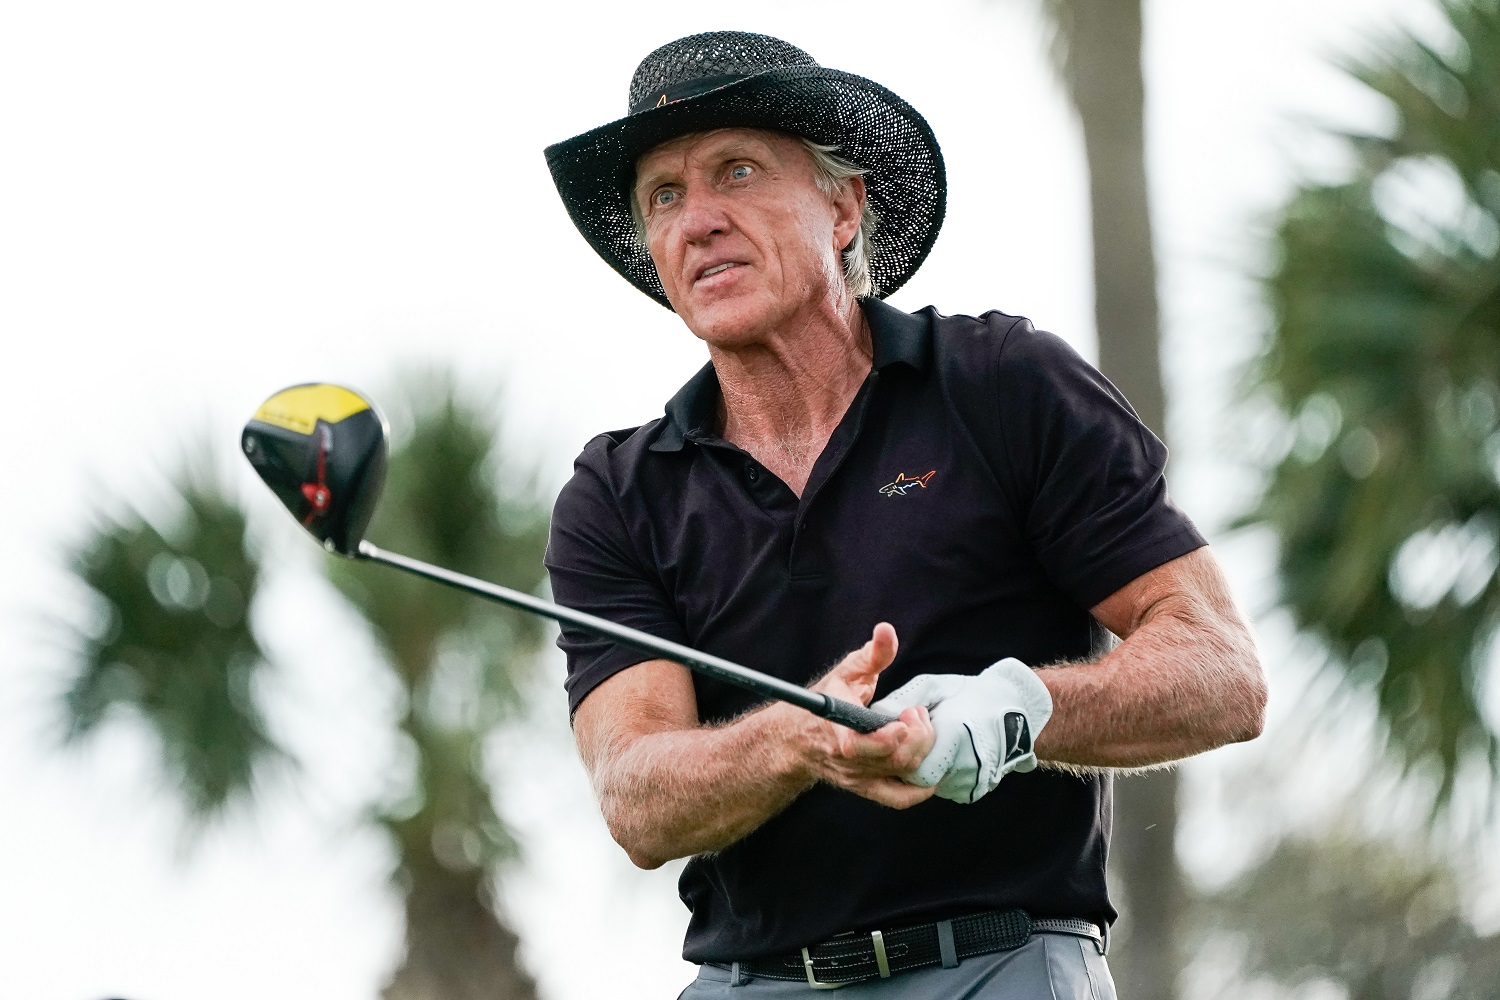 Greg Norman is the face of the new rival to the PGA Tour that is trying to lure golf's biggest stars to a series of tournaments across Asia, Europe, and the Middle East. However, the PGA Tour is fighting back. | Ben Jared/PGA Tour for Getty Images